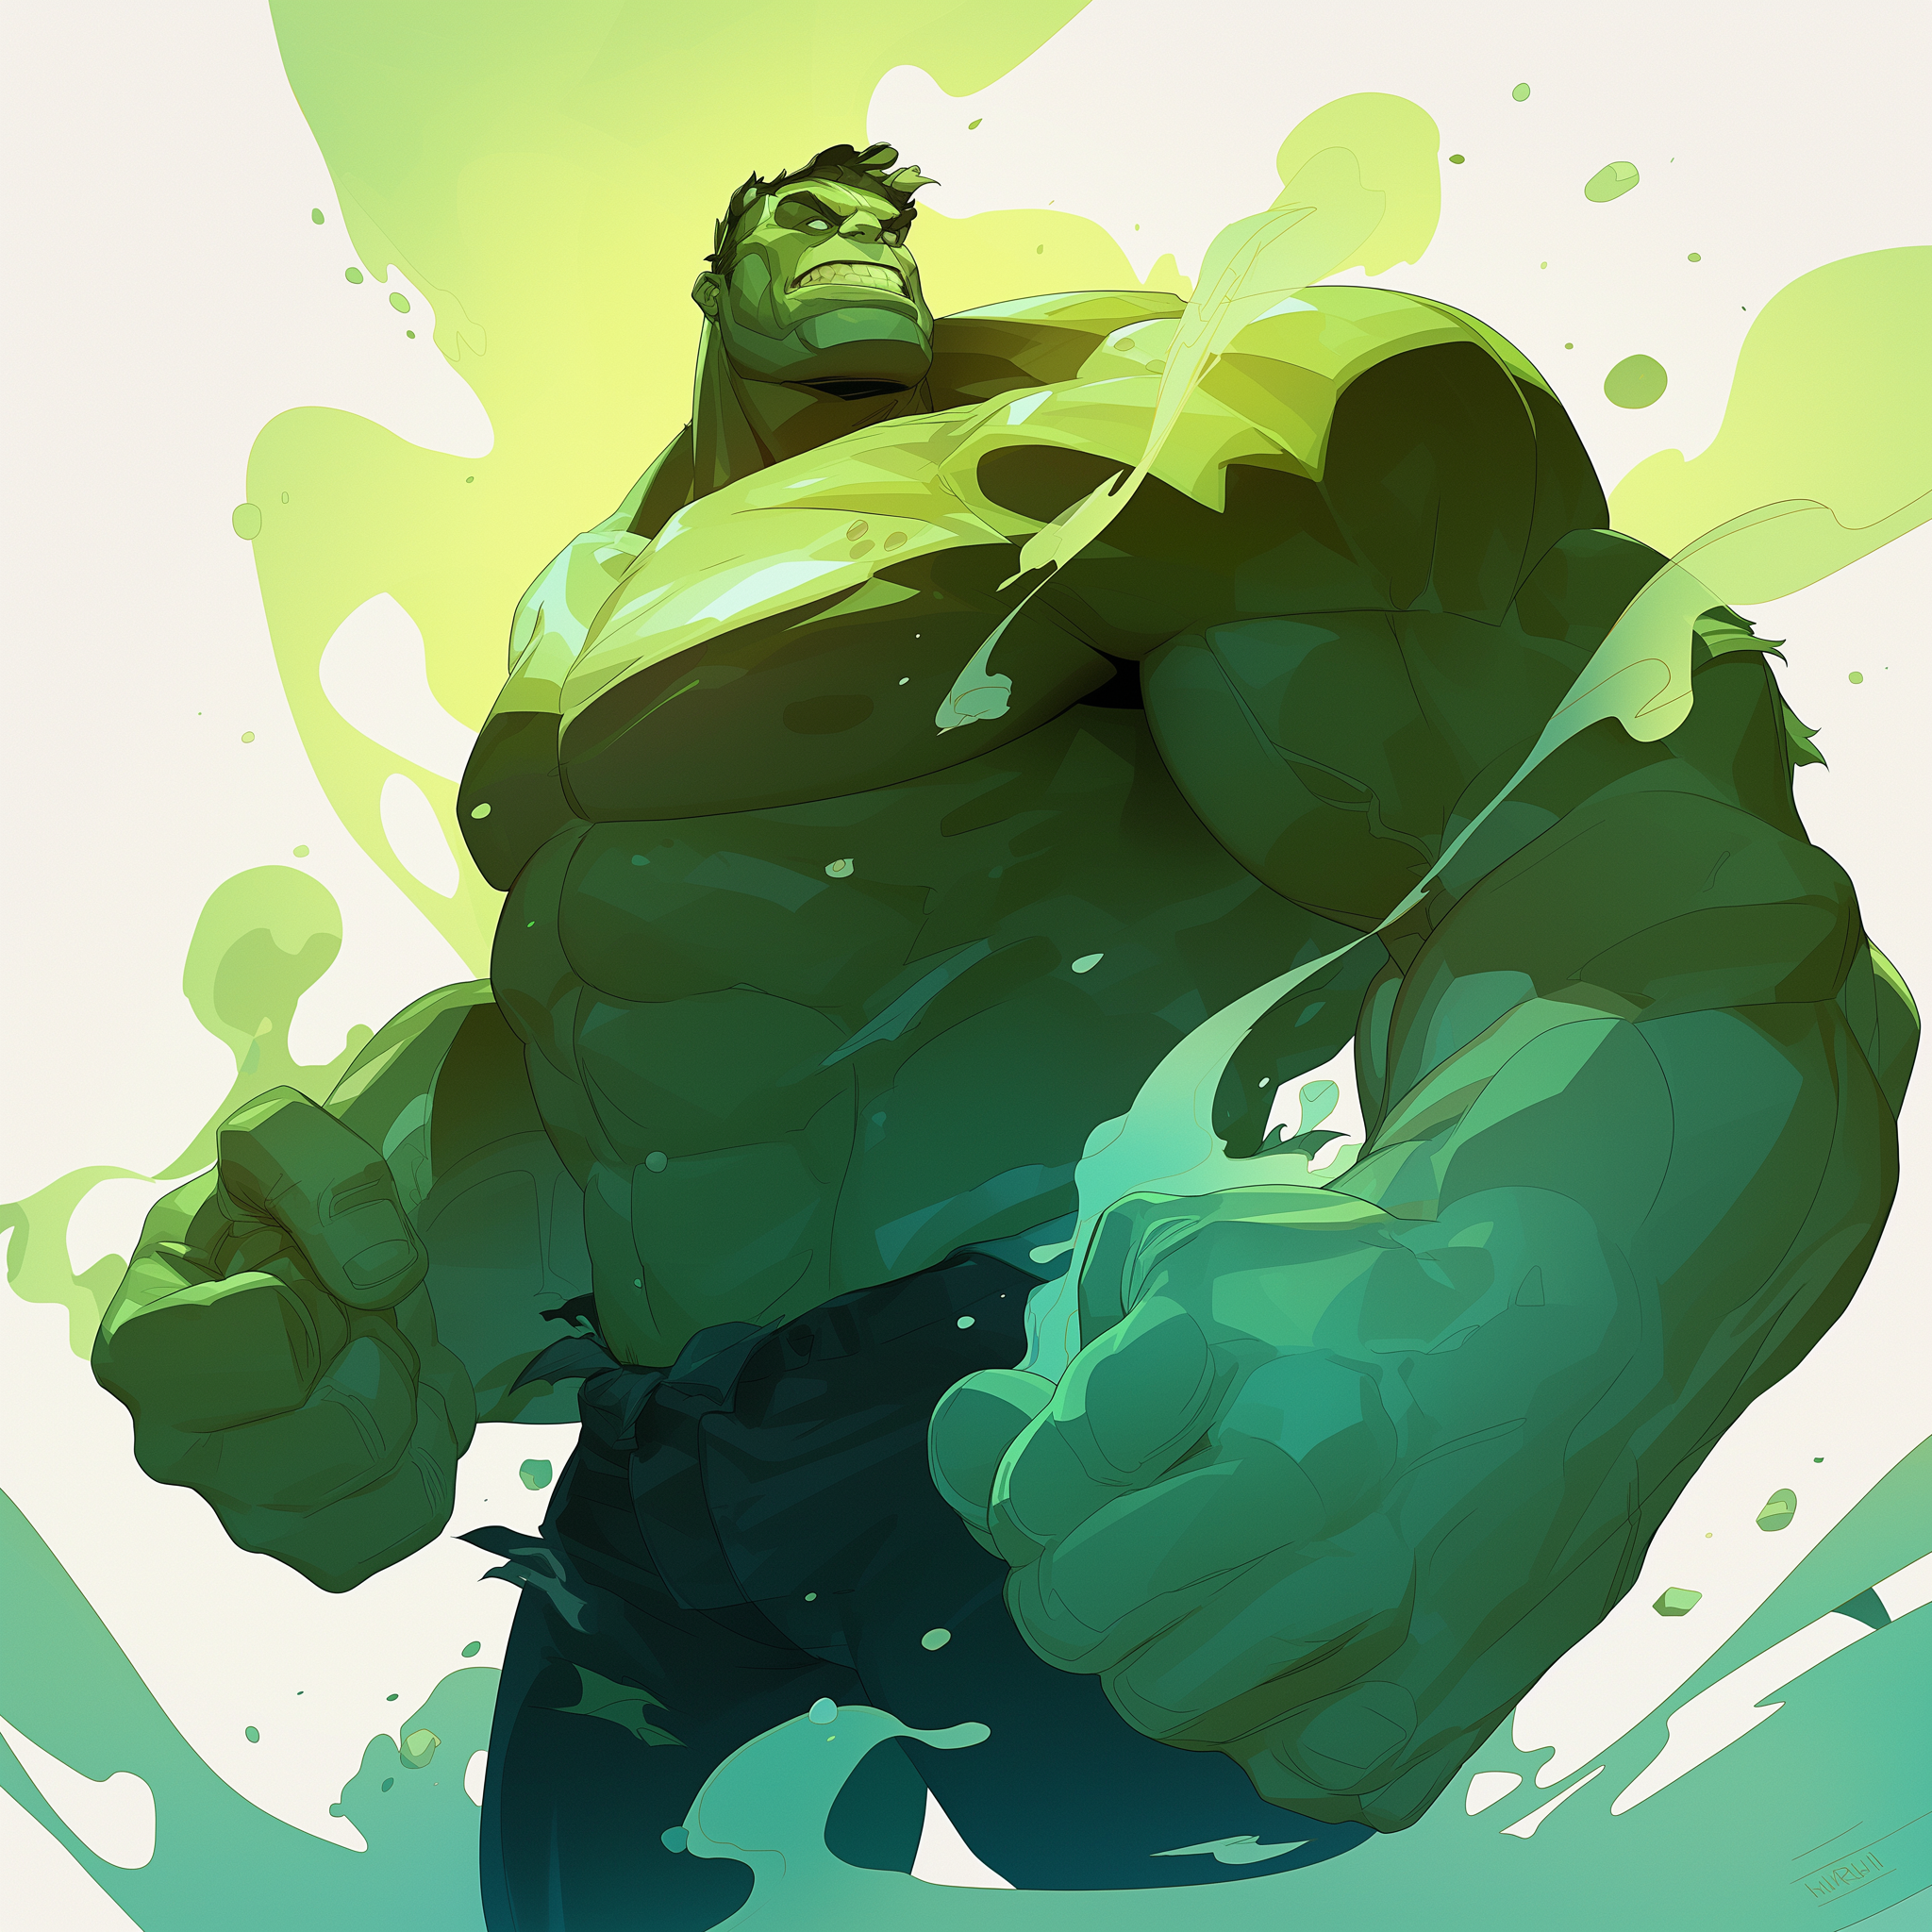 Stylized avatar of the Hulk from Marvel Comics, showcasing his muscular build and iconic green color with a dynamic background.